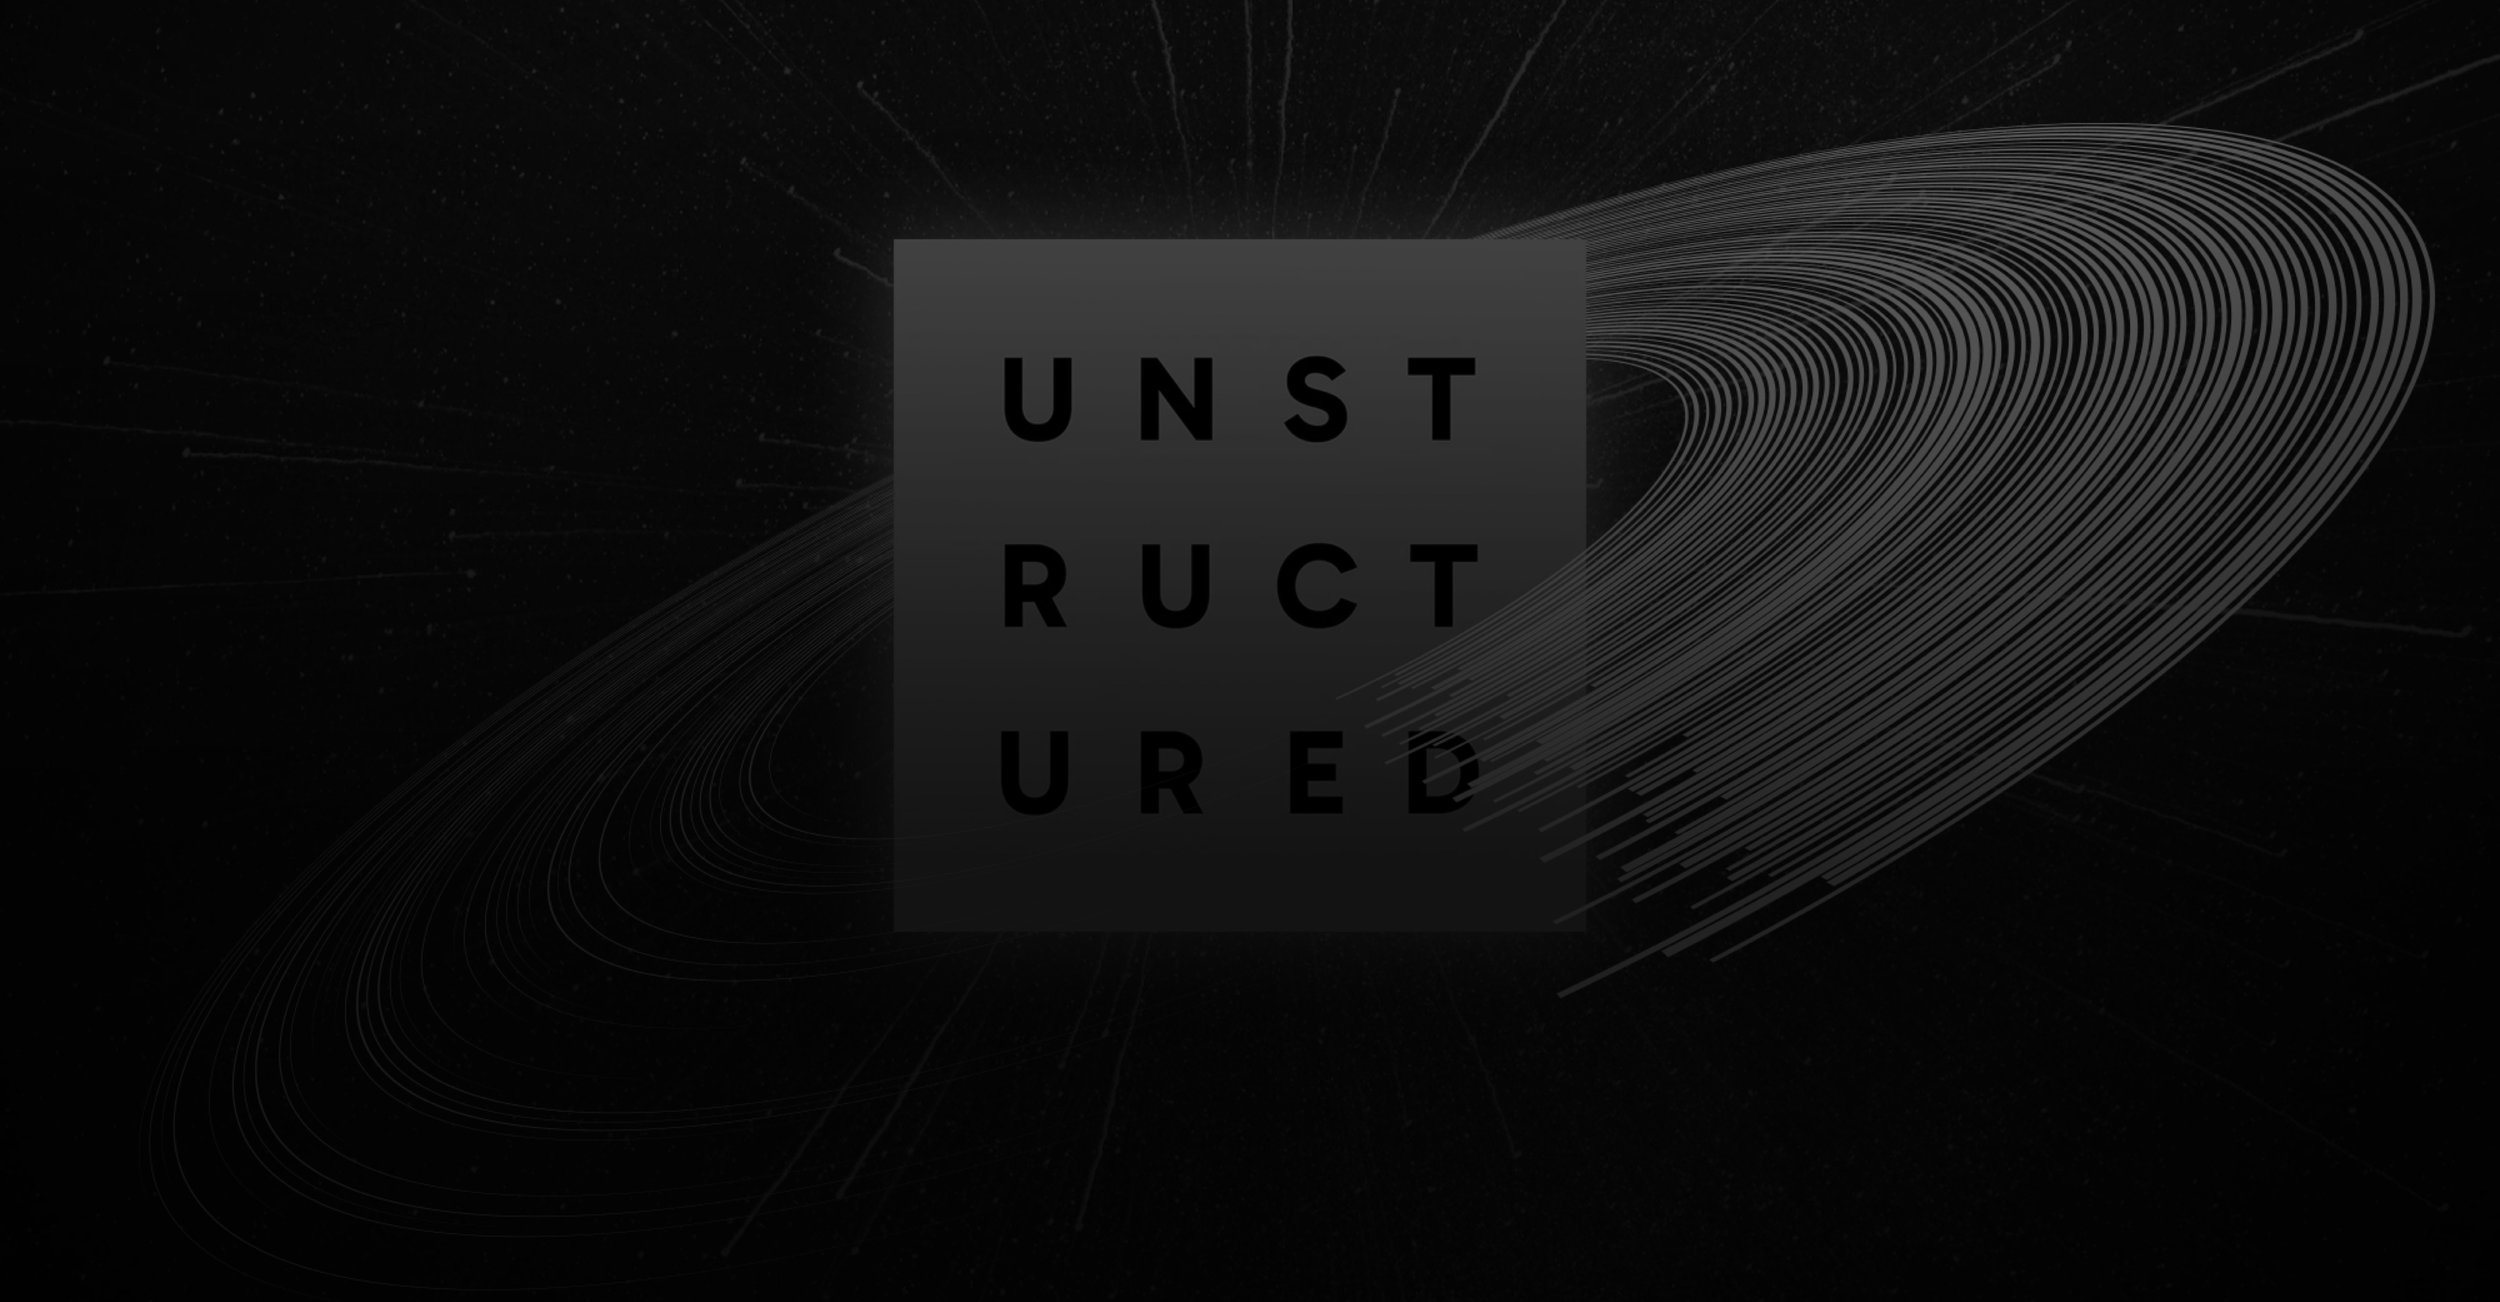   Unstructured   More data science. Less data cleaning. 